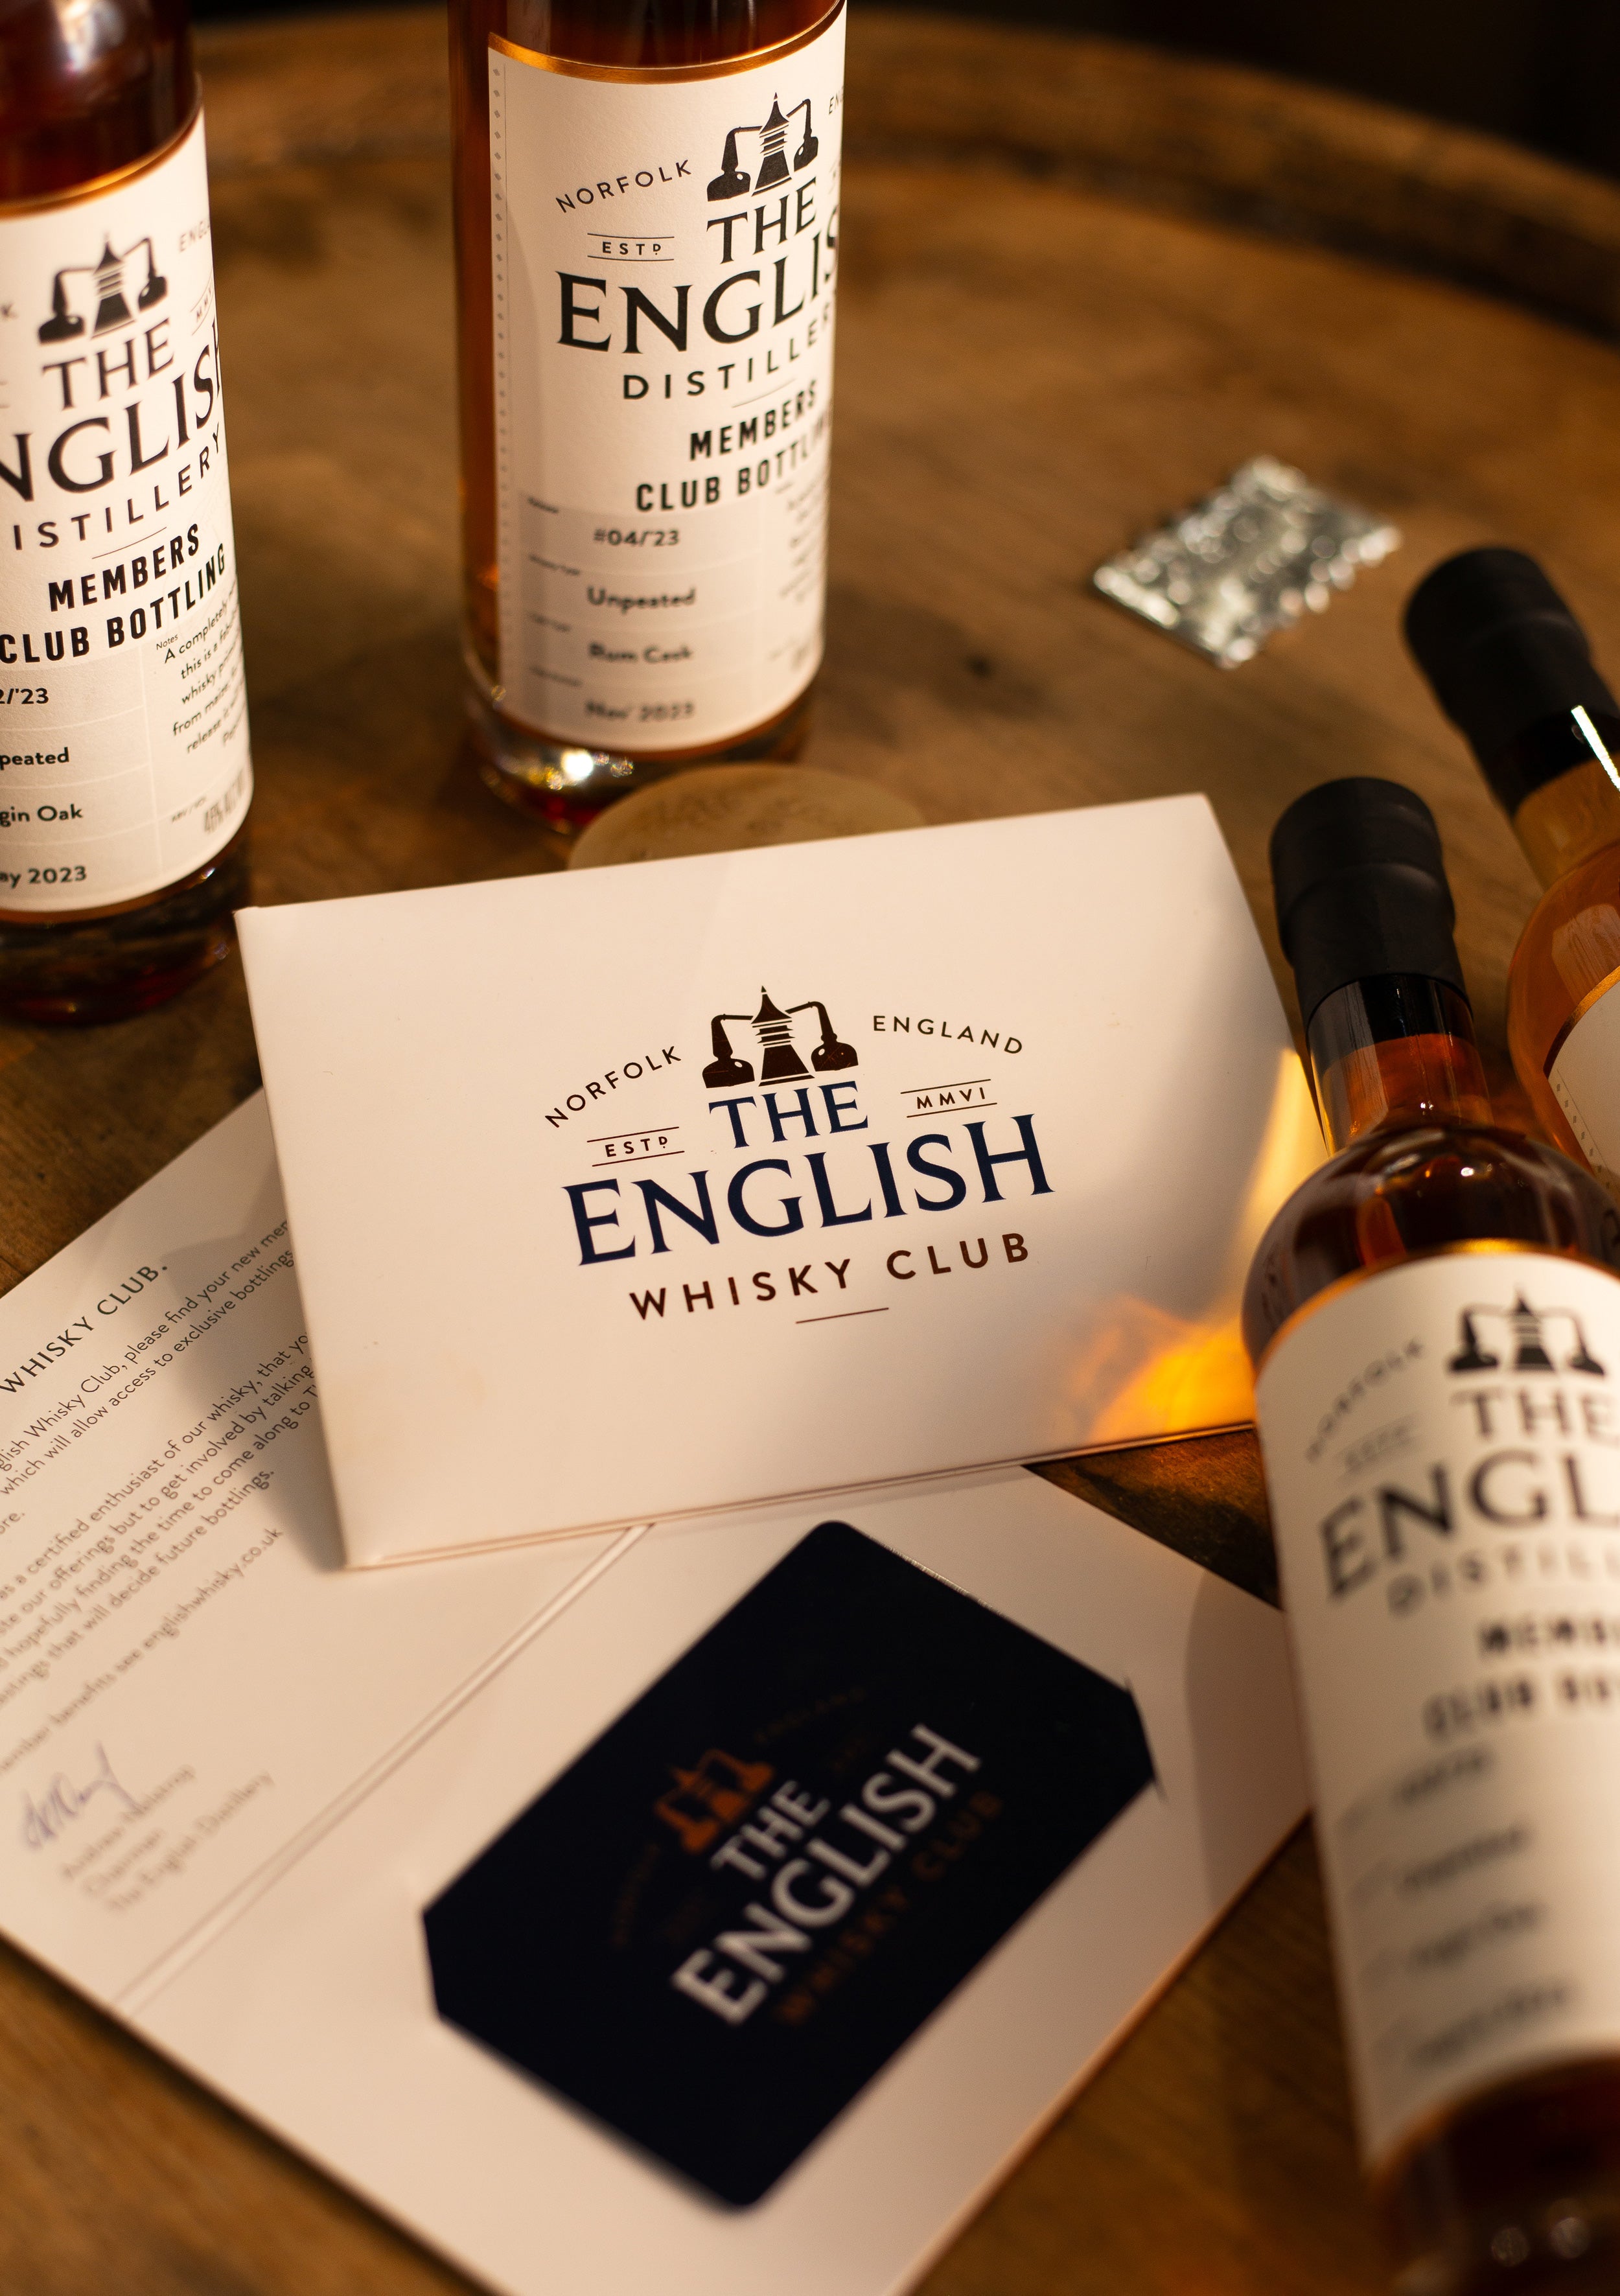 Membership pack and tasting bottles from The English Whisky Club